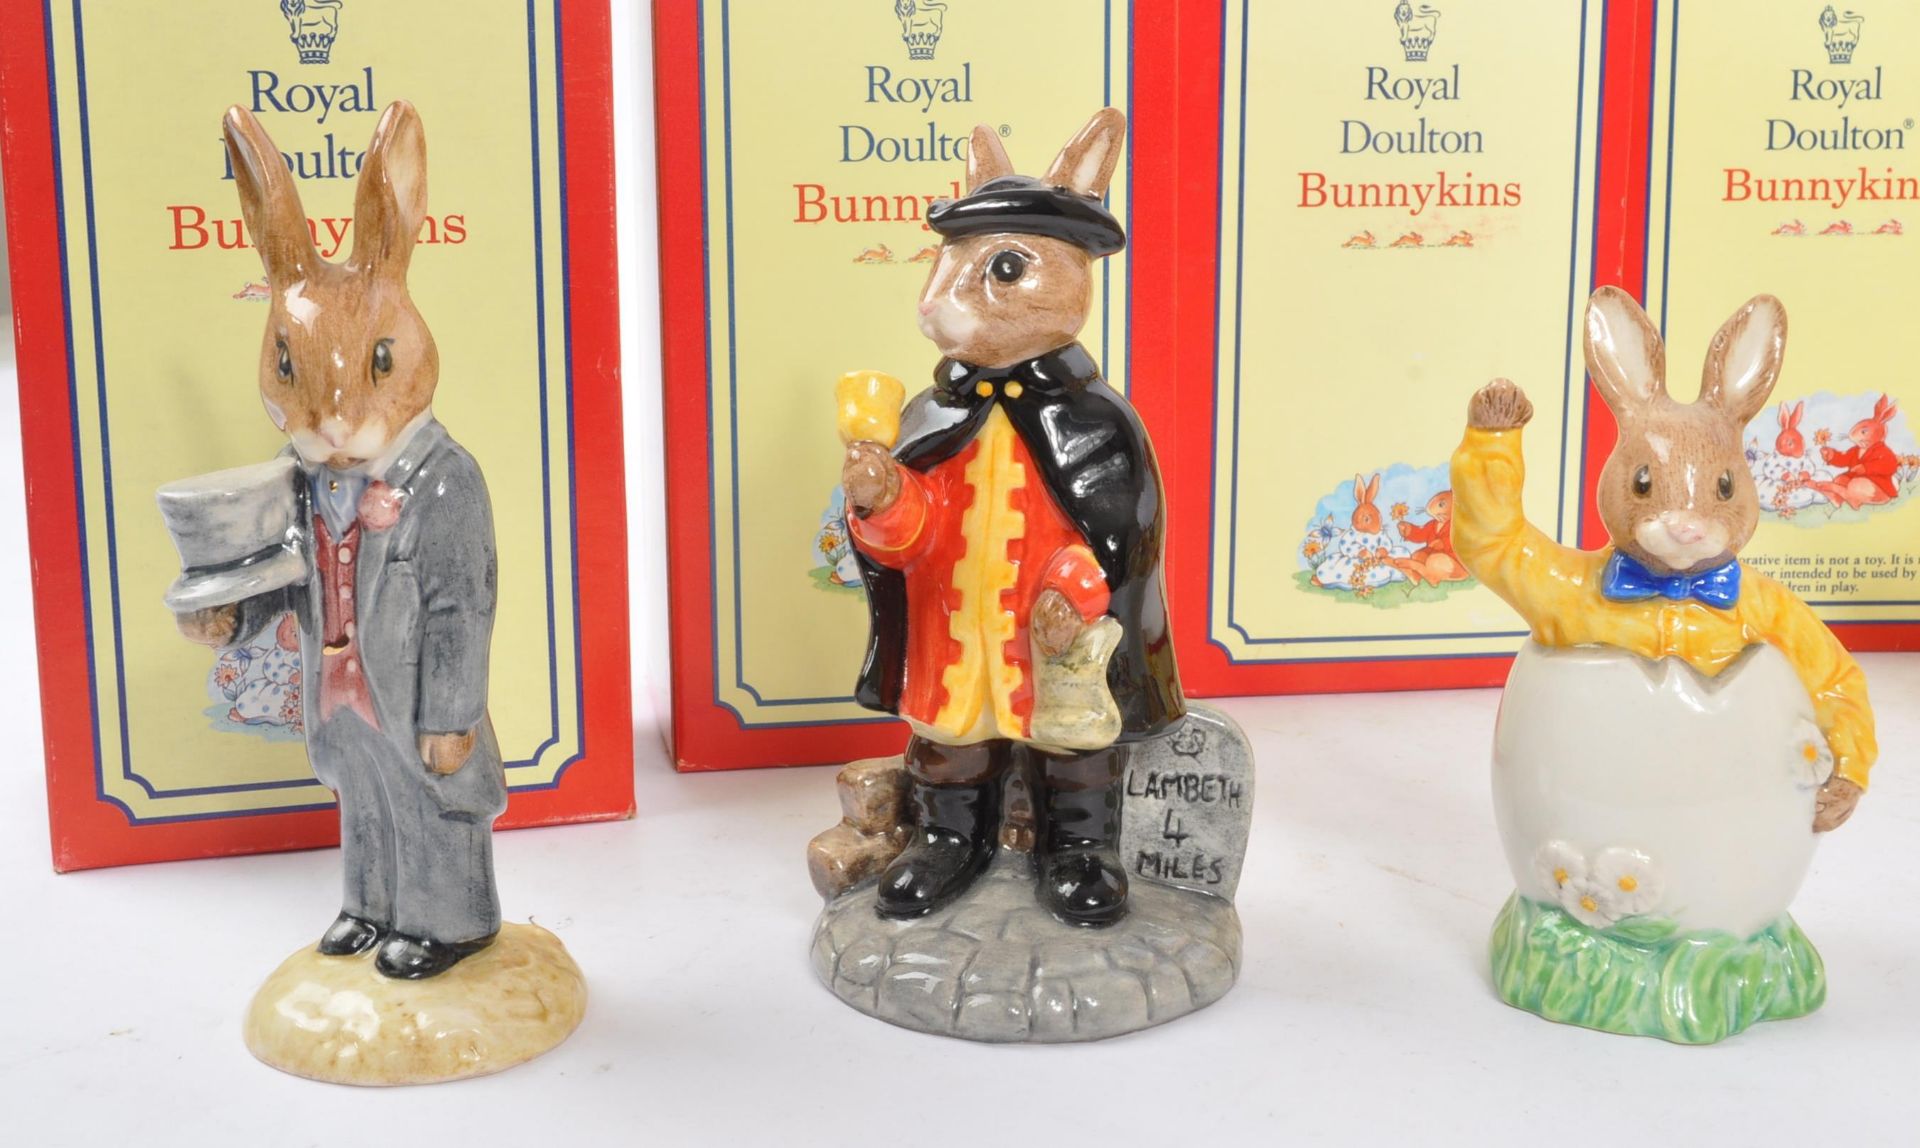 ROYAL DOULTON - BUNNYKINS - COLLECTION OF PORCELAIN FIGURES - Image 7 of 9